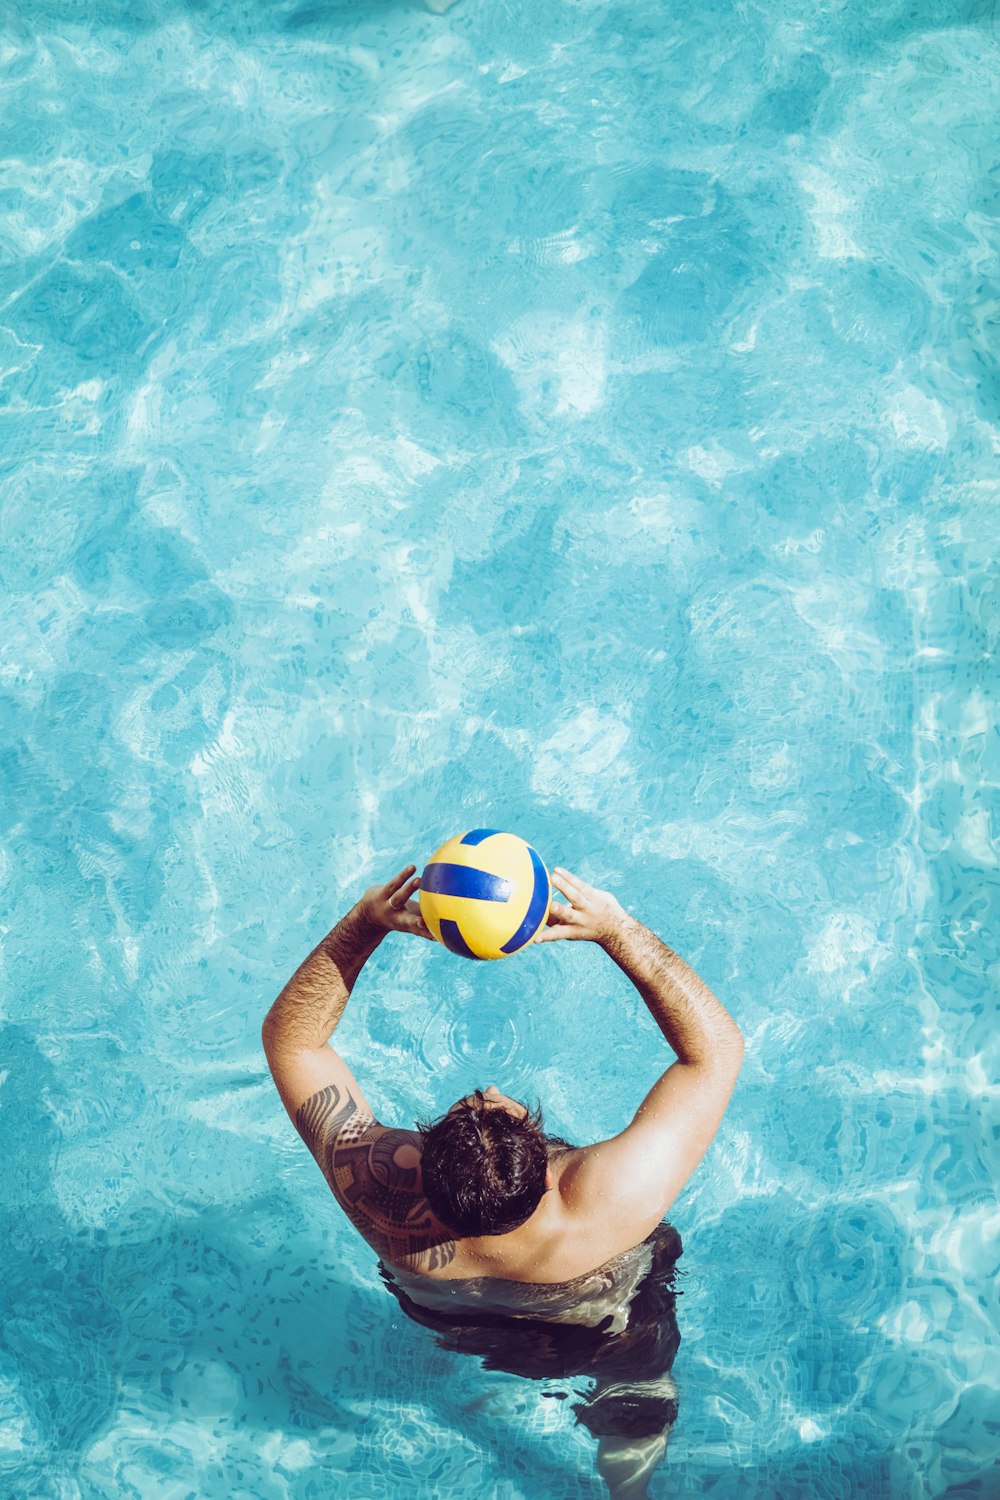 Waterpolo Pictures  Download Free Images on Unsplash